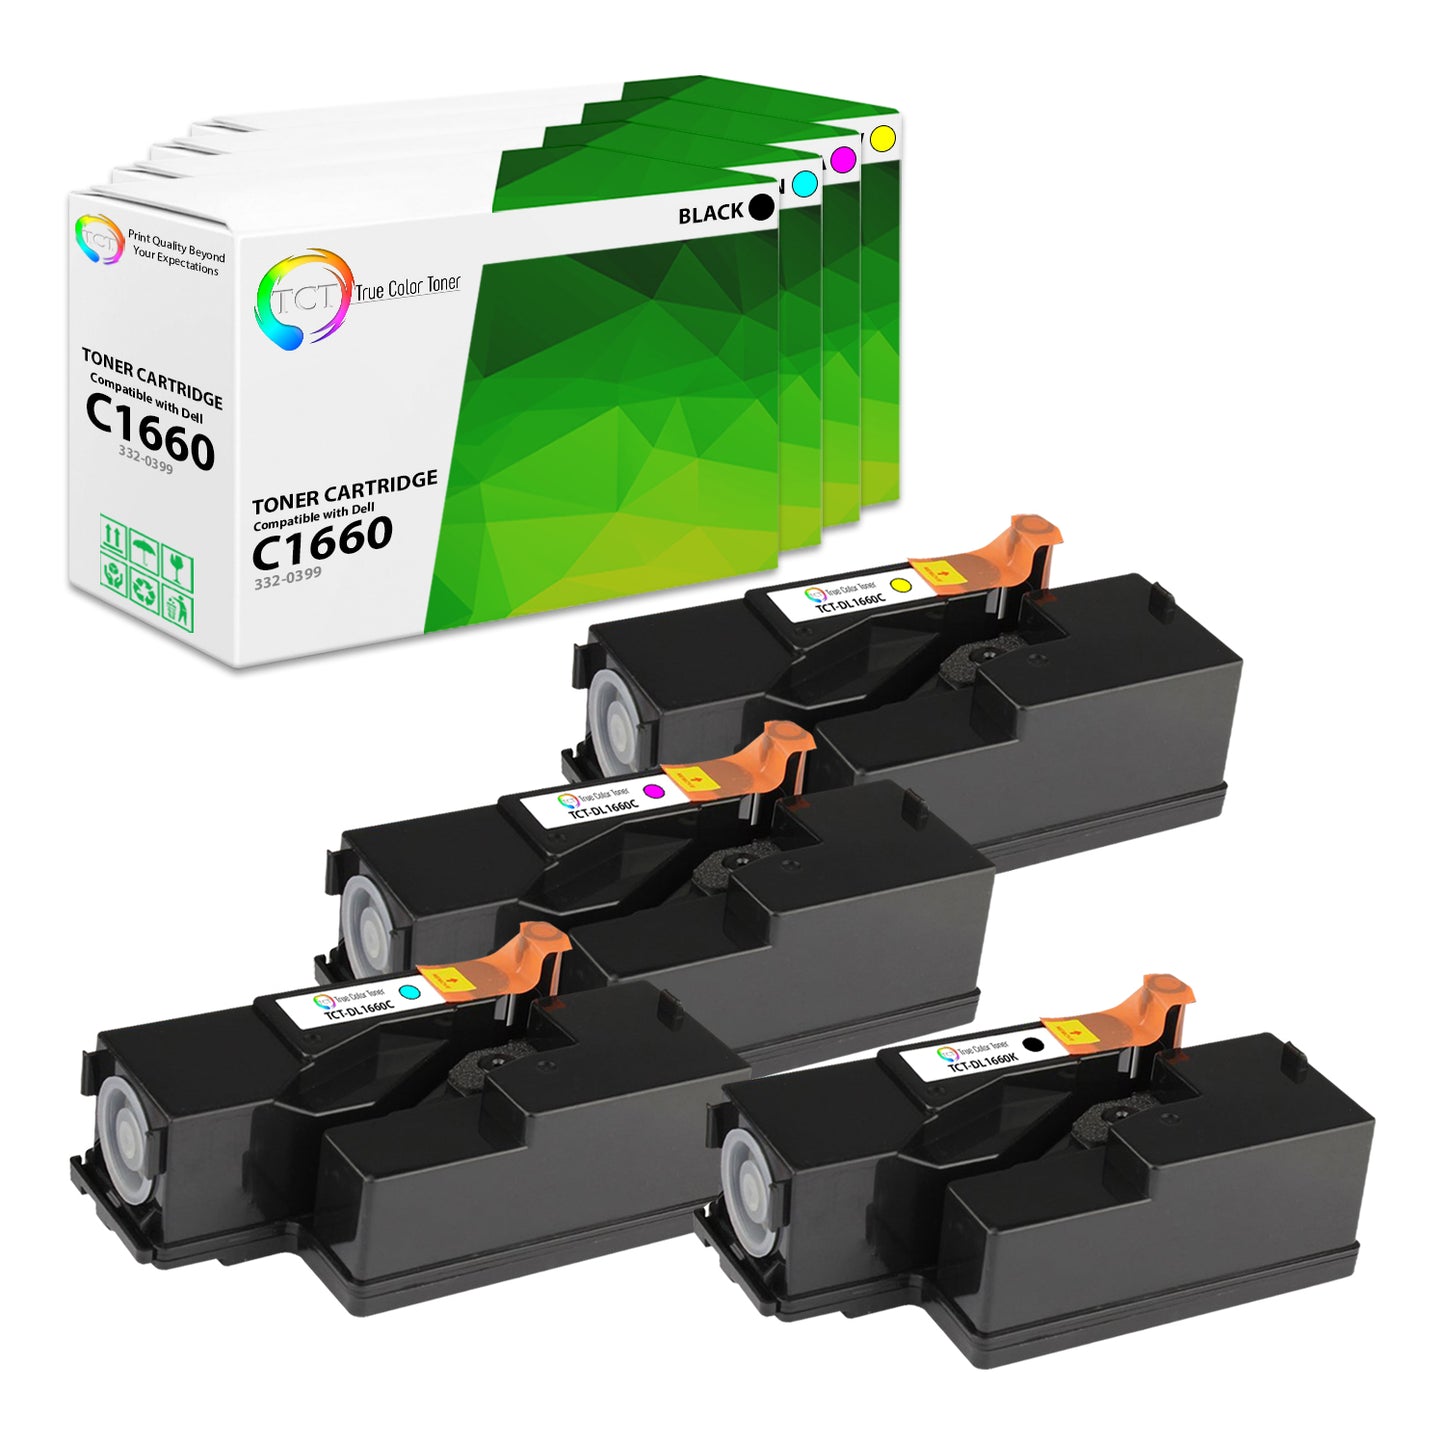 TCT Compatible Toner Cartridge Replacement for the Dell C1660 Series - 4 Pack (BK, C, M, Y)